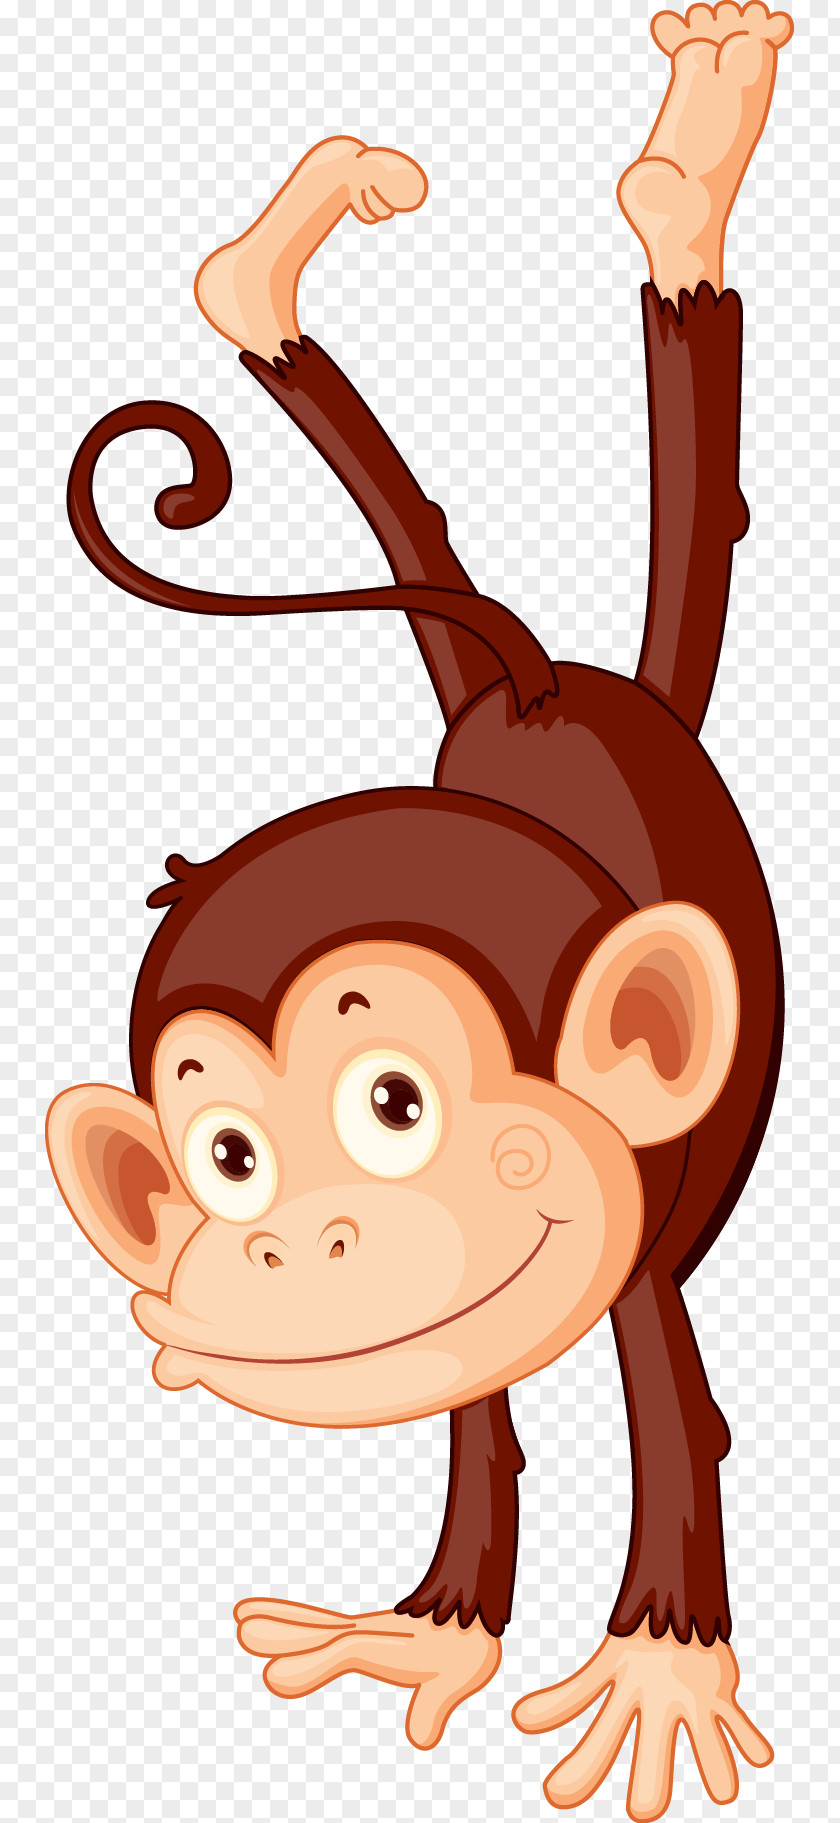 Hand-painted Monkey Baboons Crab-eating Macaque Illustration PNG